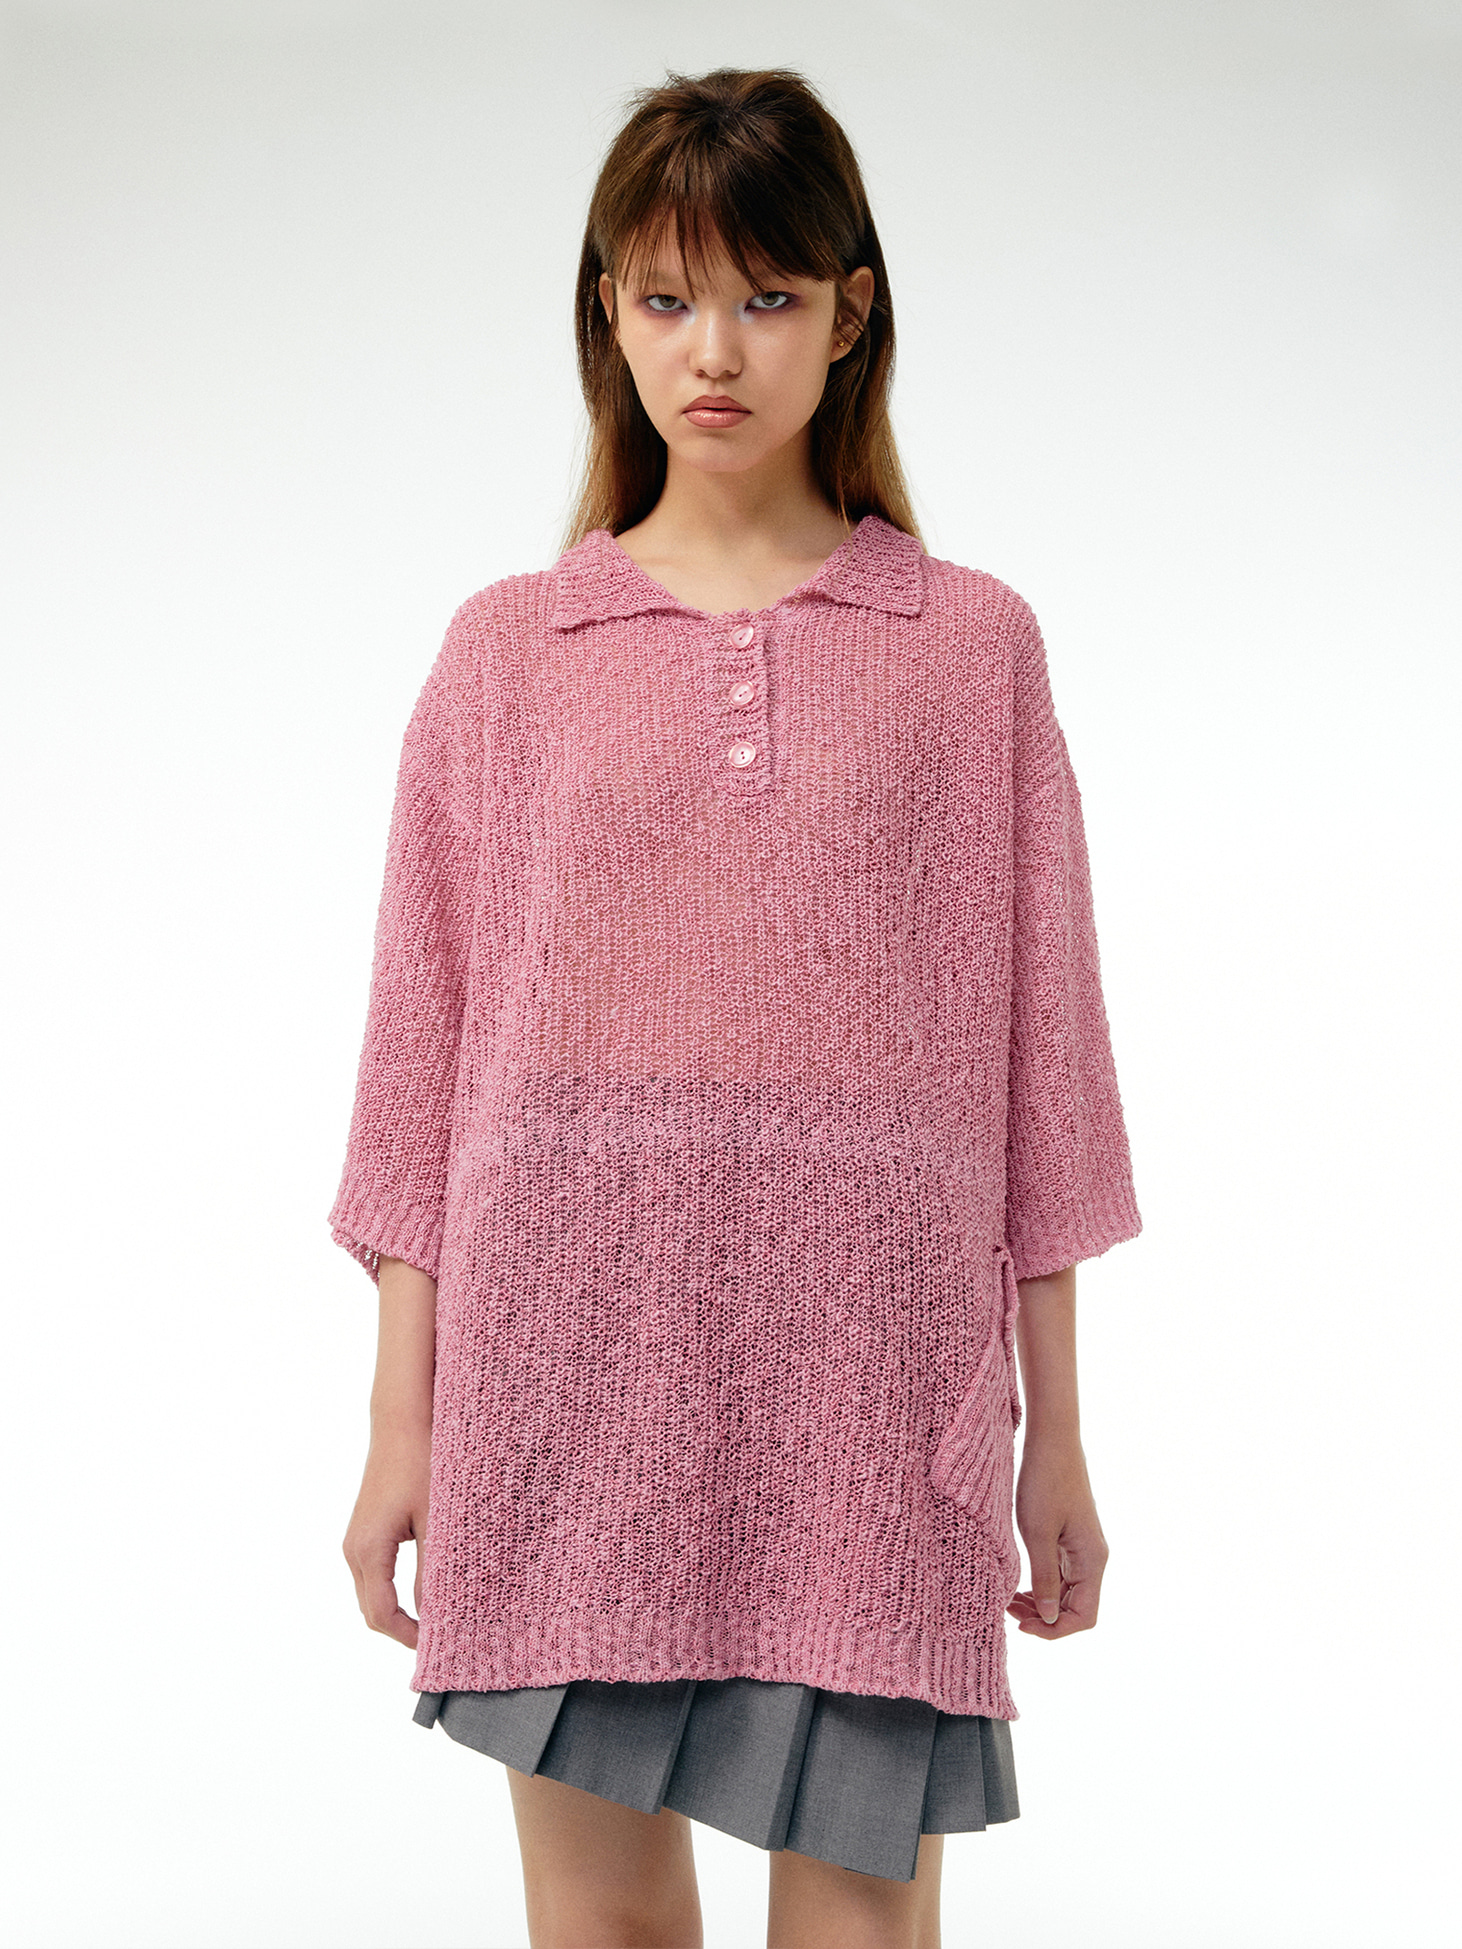 Pocketed short sleeve knit top / Pink